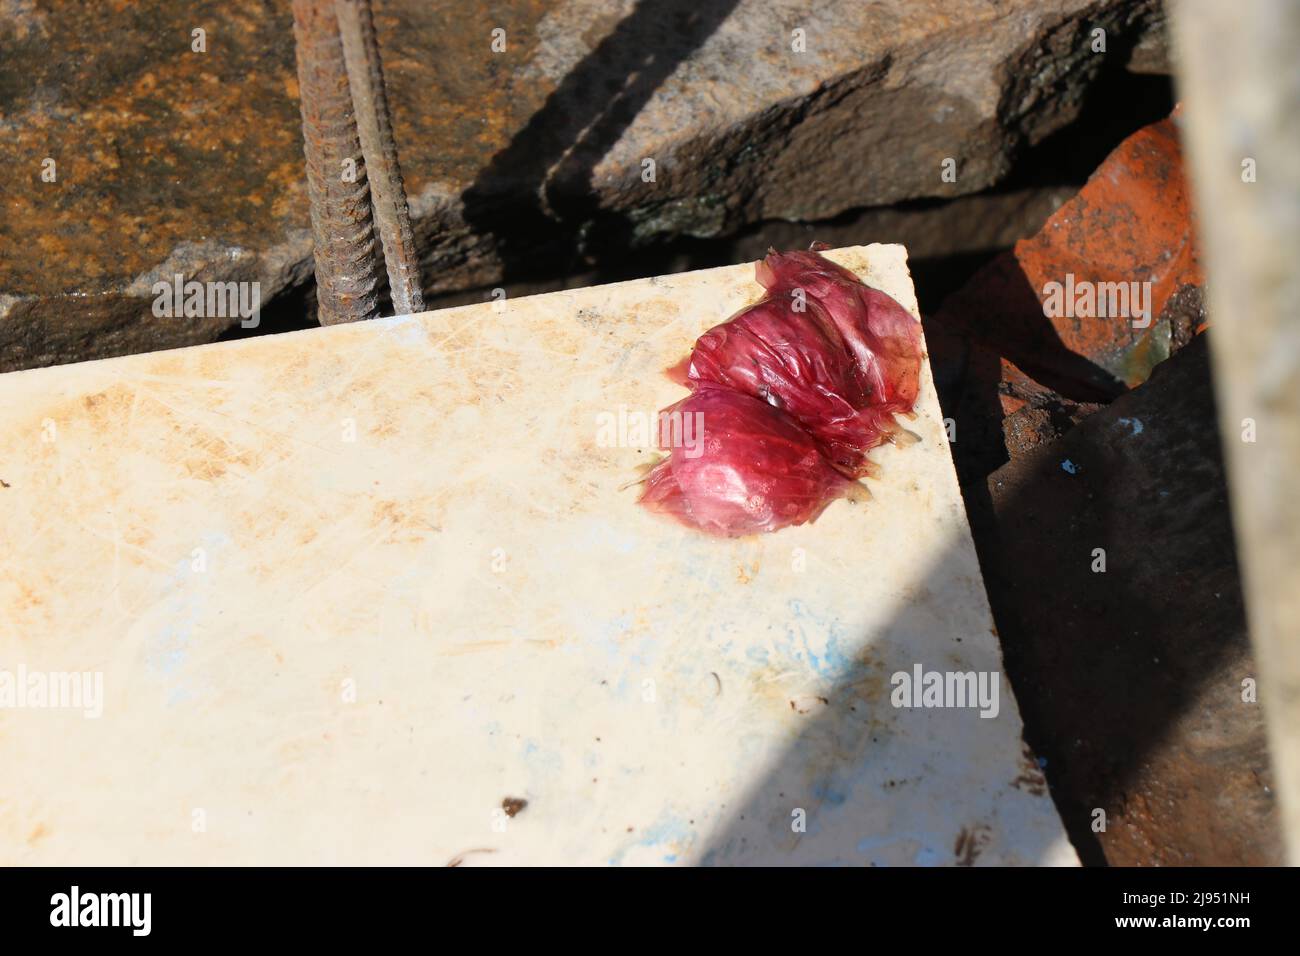 Onion peelings are fallen on the piece of tiles with showers of sunlight all over its surface Stock Photo